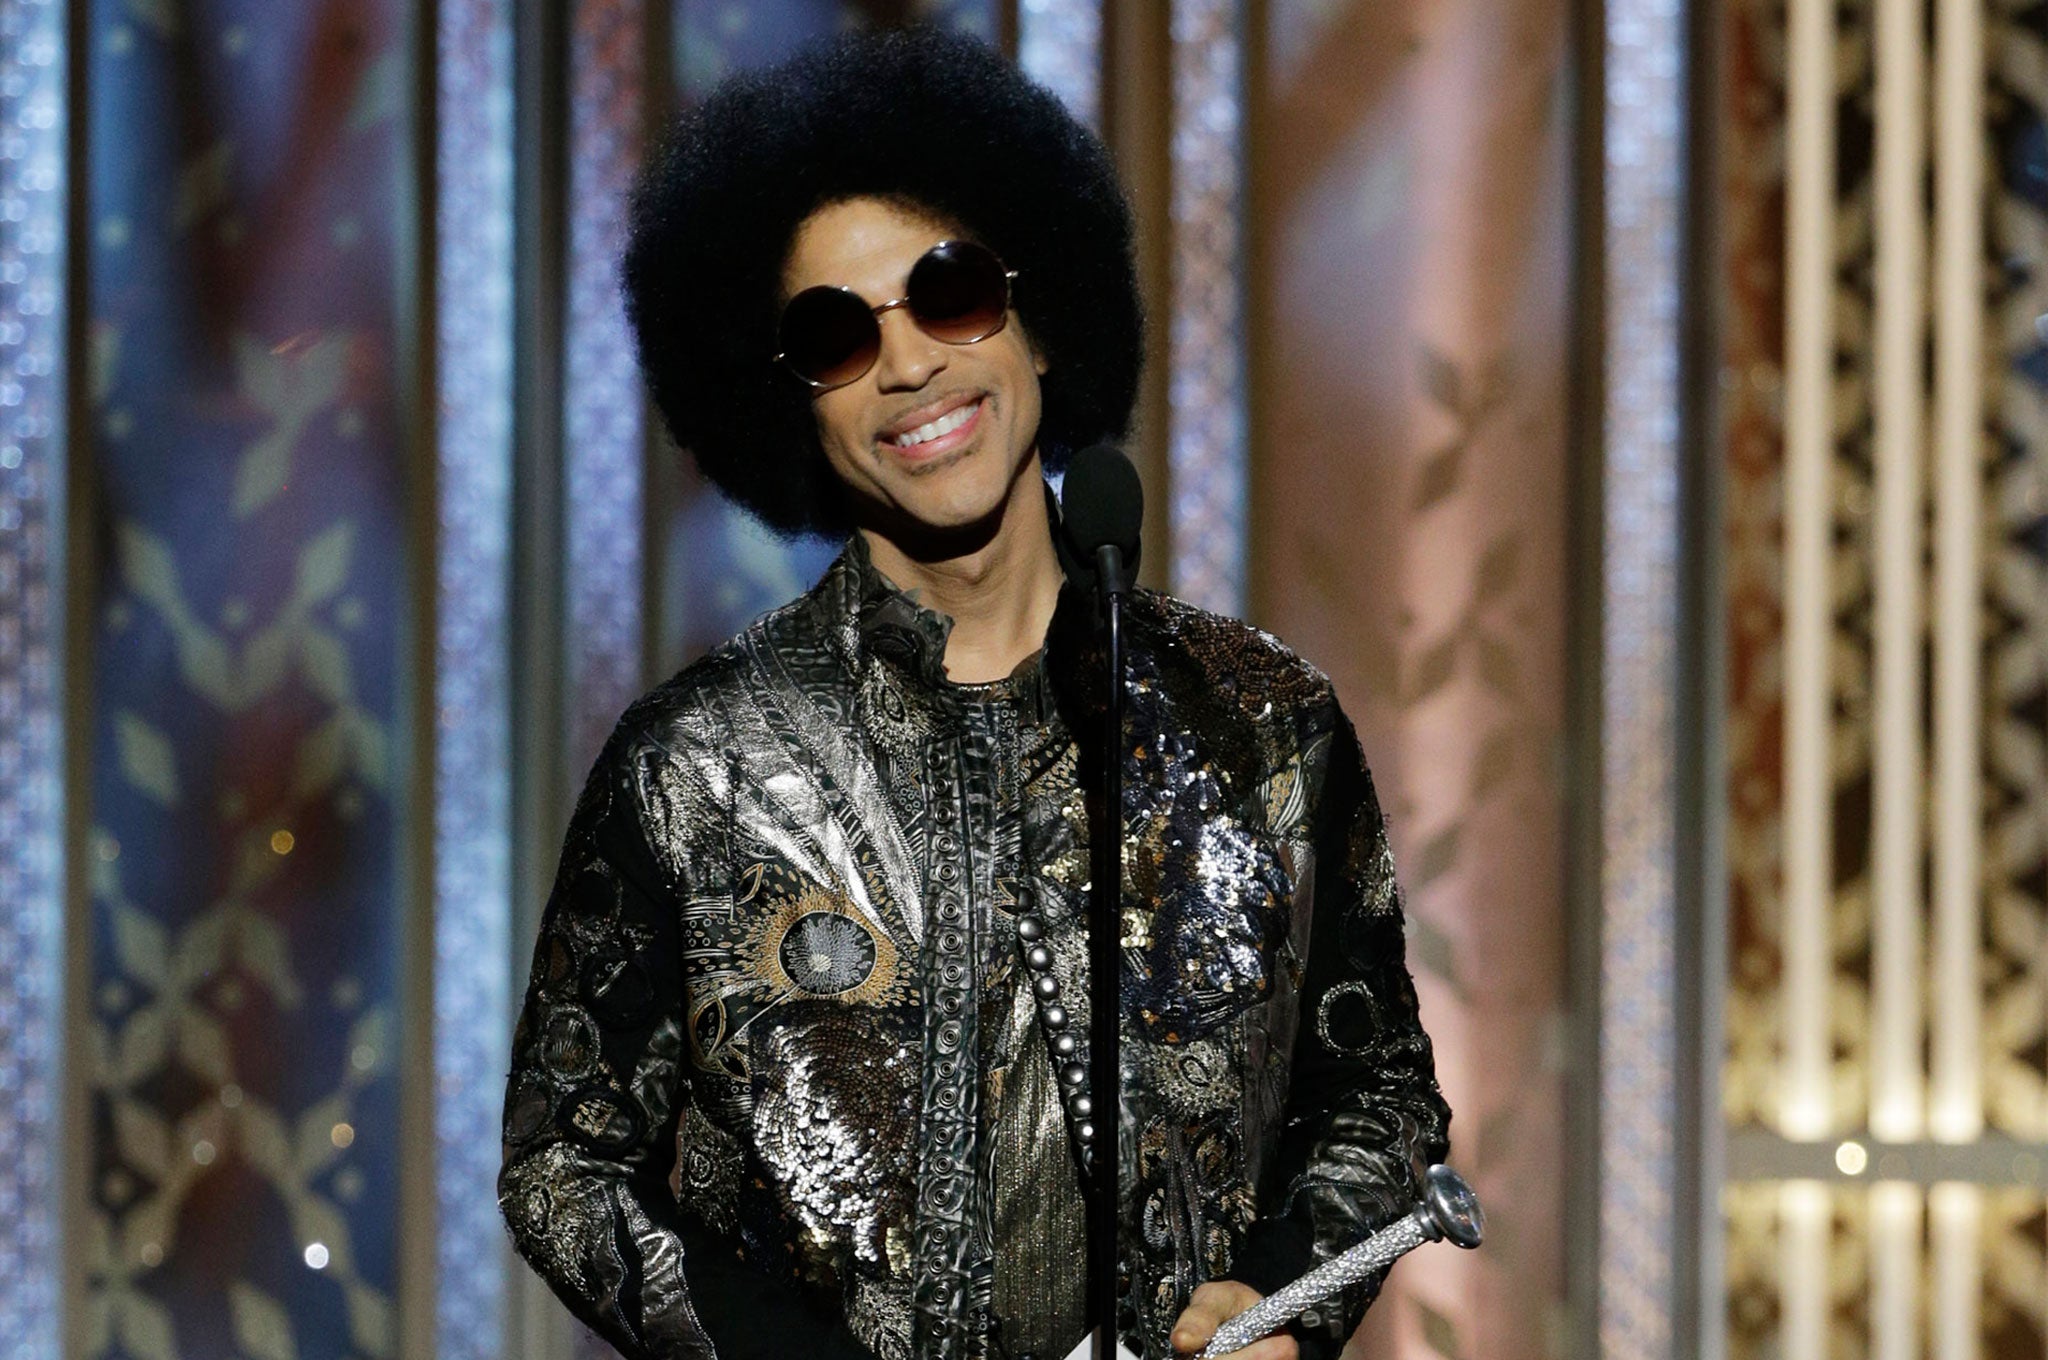 Prince speaks onstage during the 72nd Annual Golden Globe Awards at The Beverly Hilton Hotel